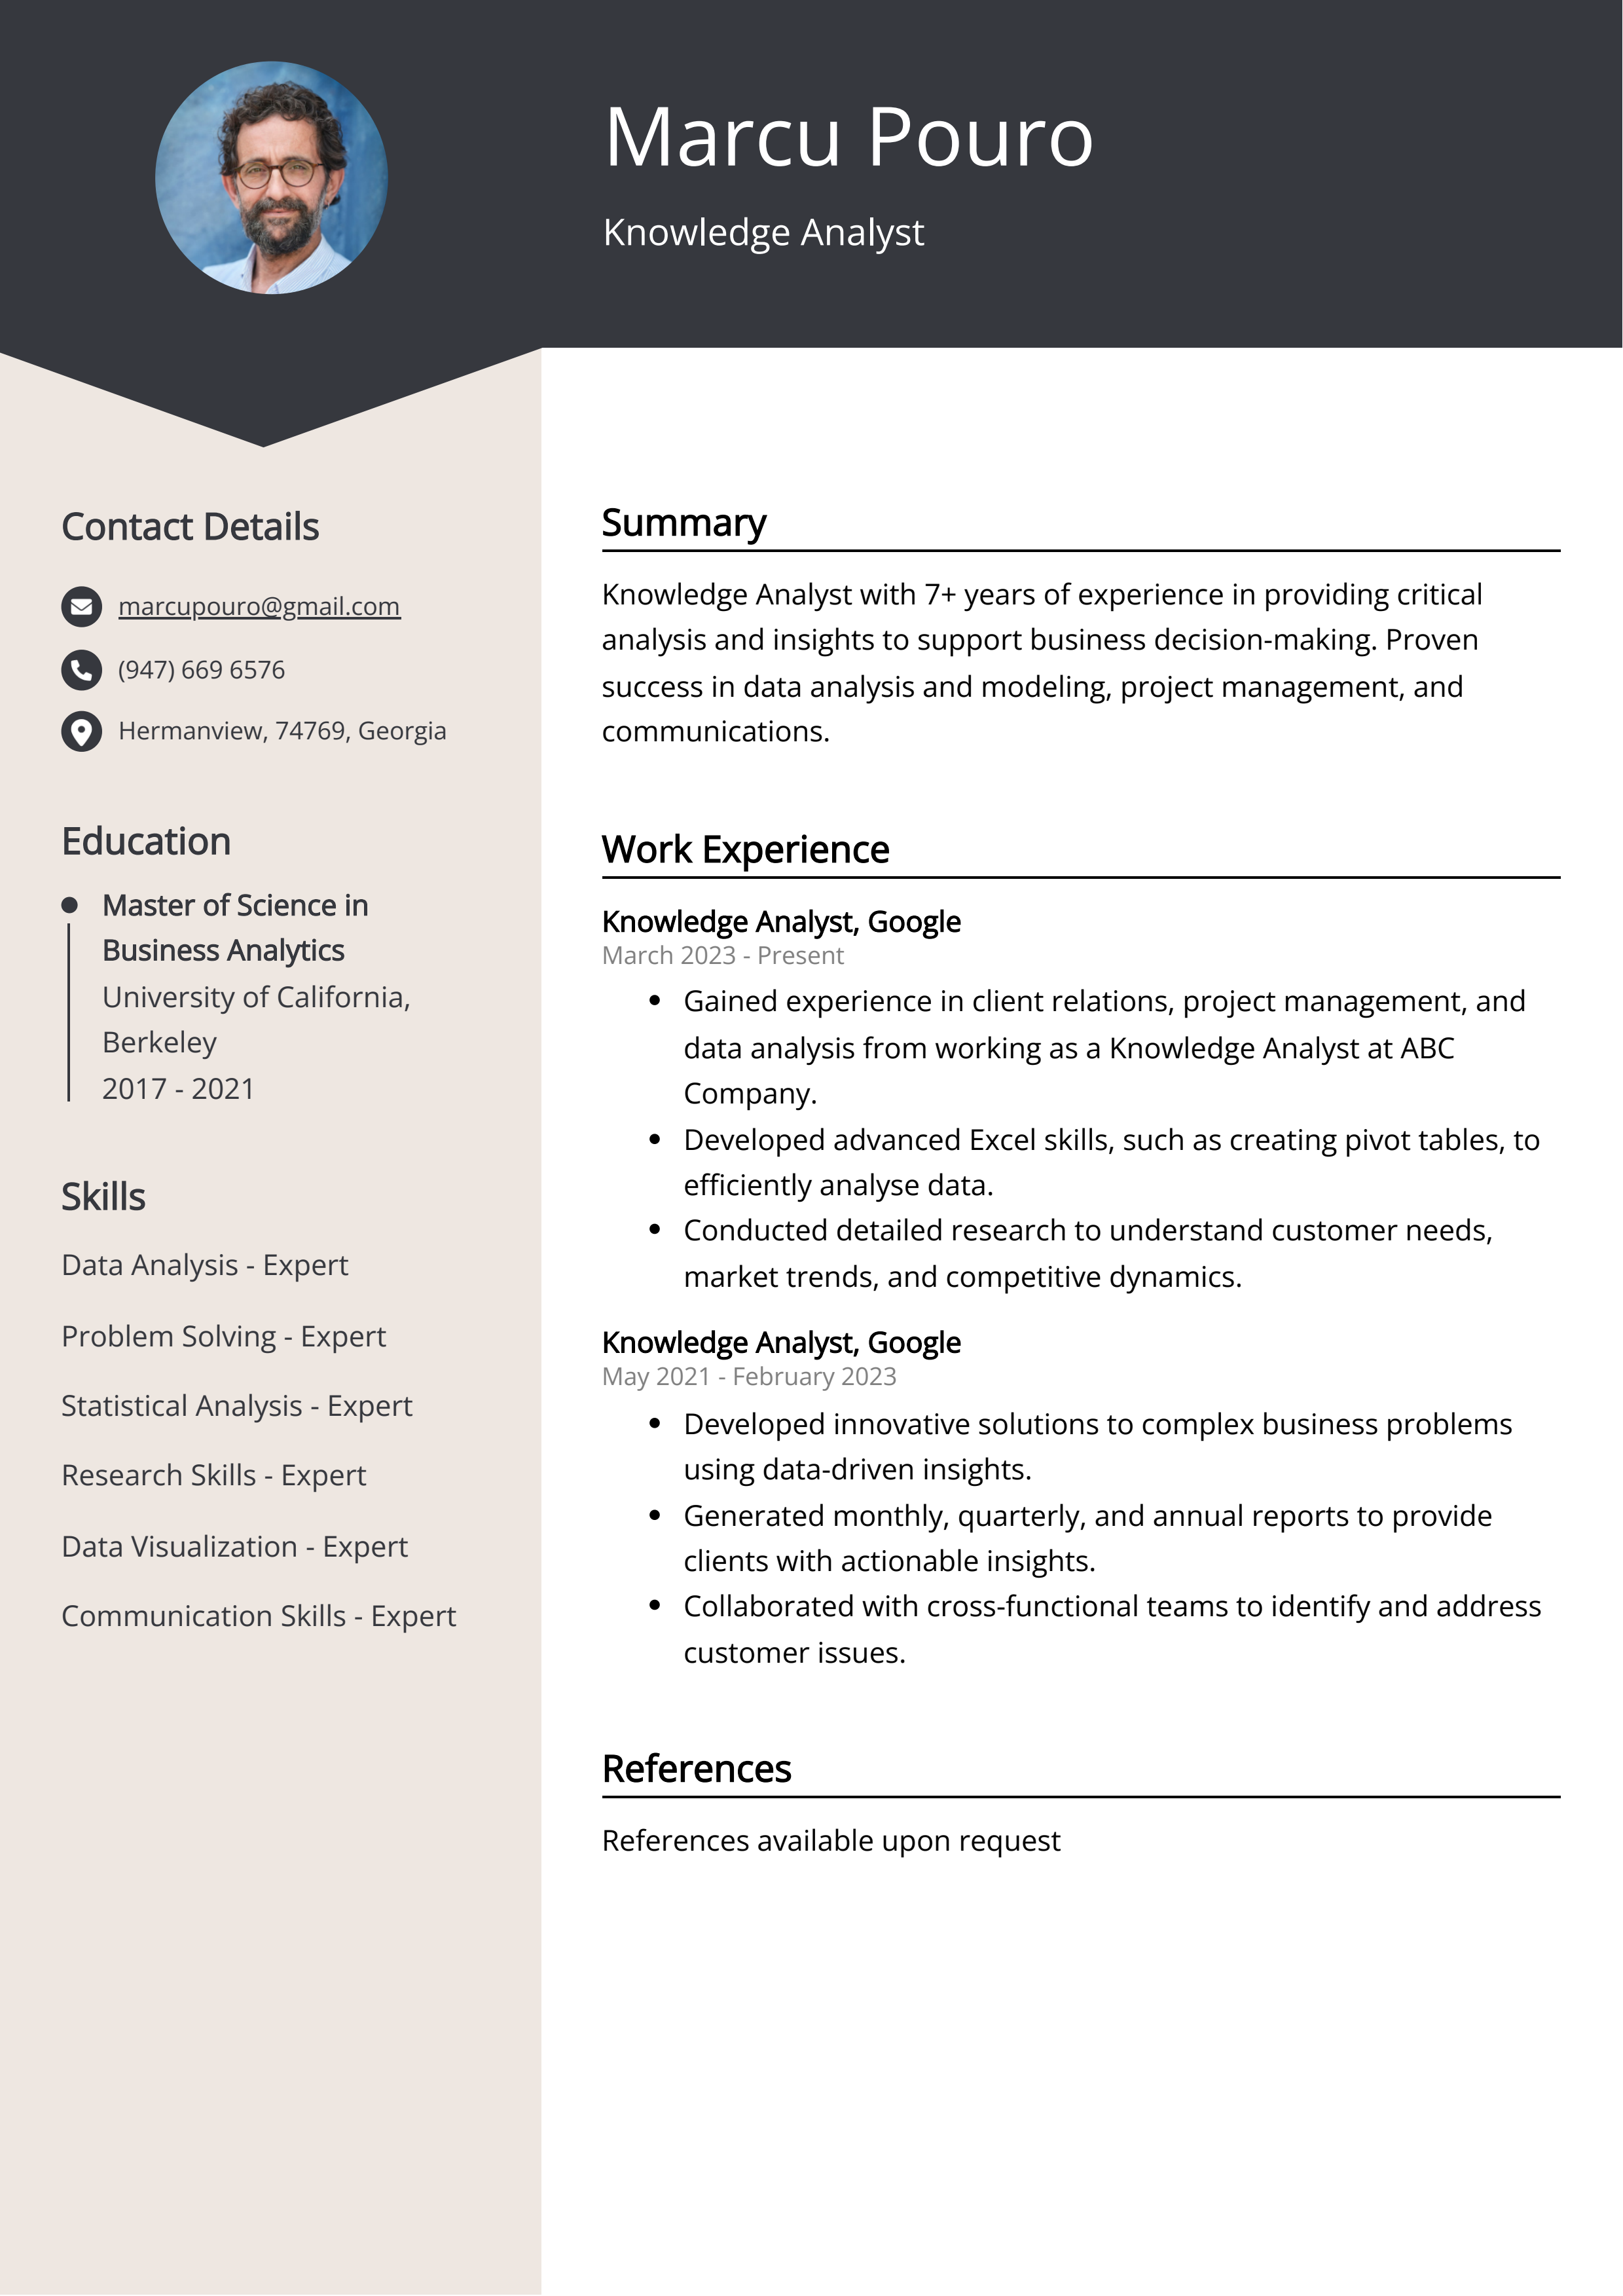 Knowledge Analyst CV Example